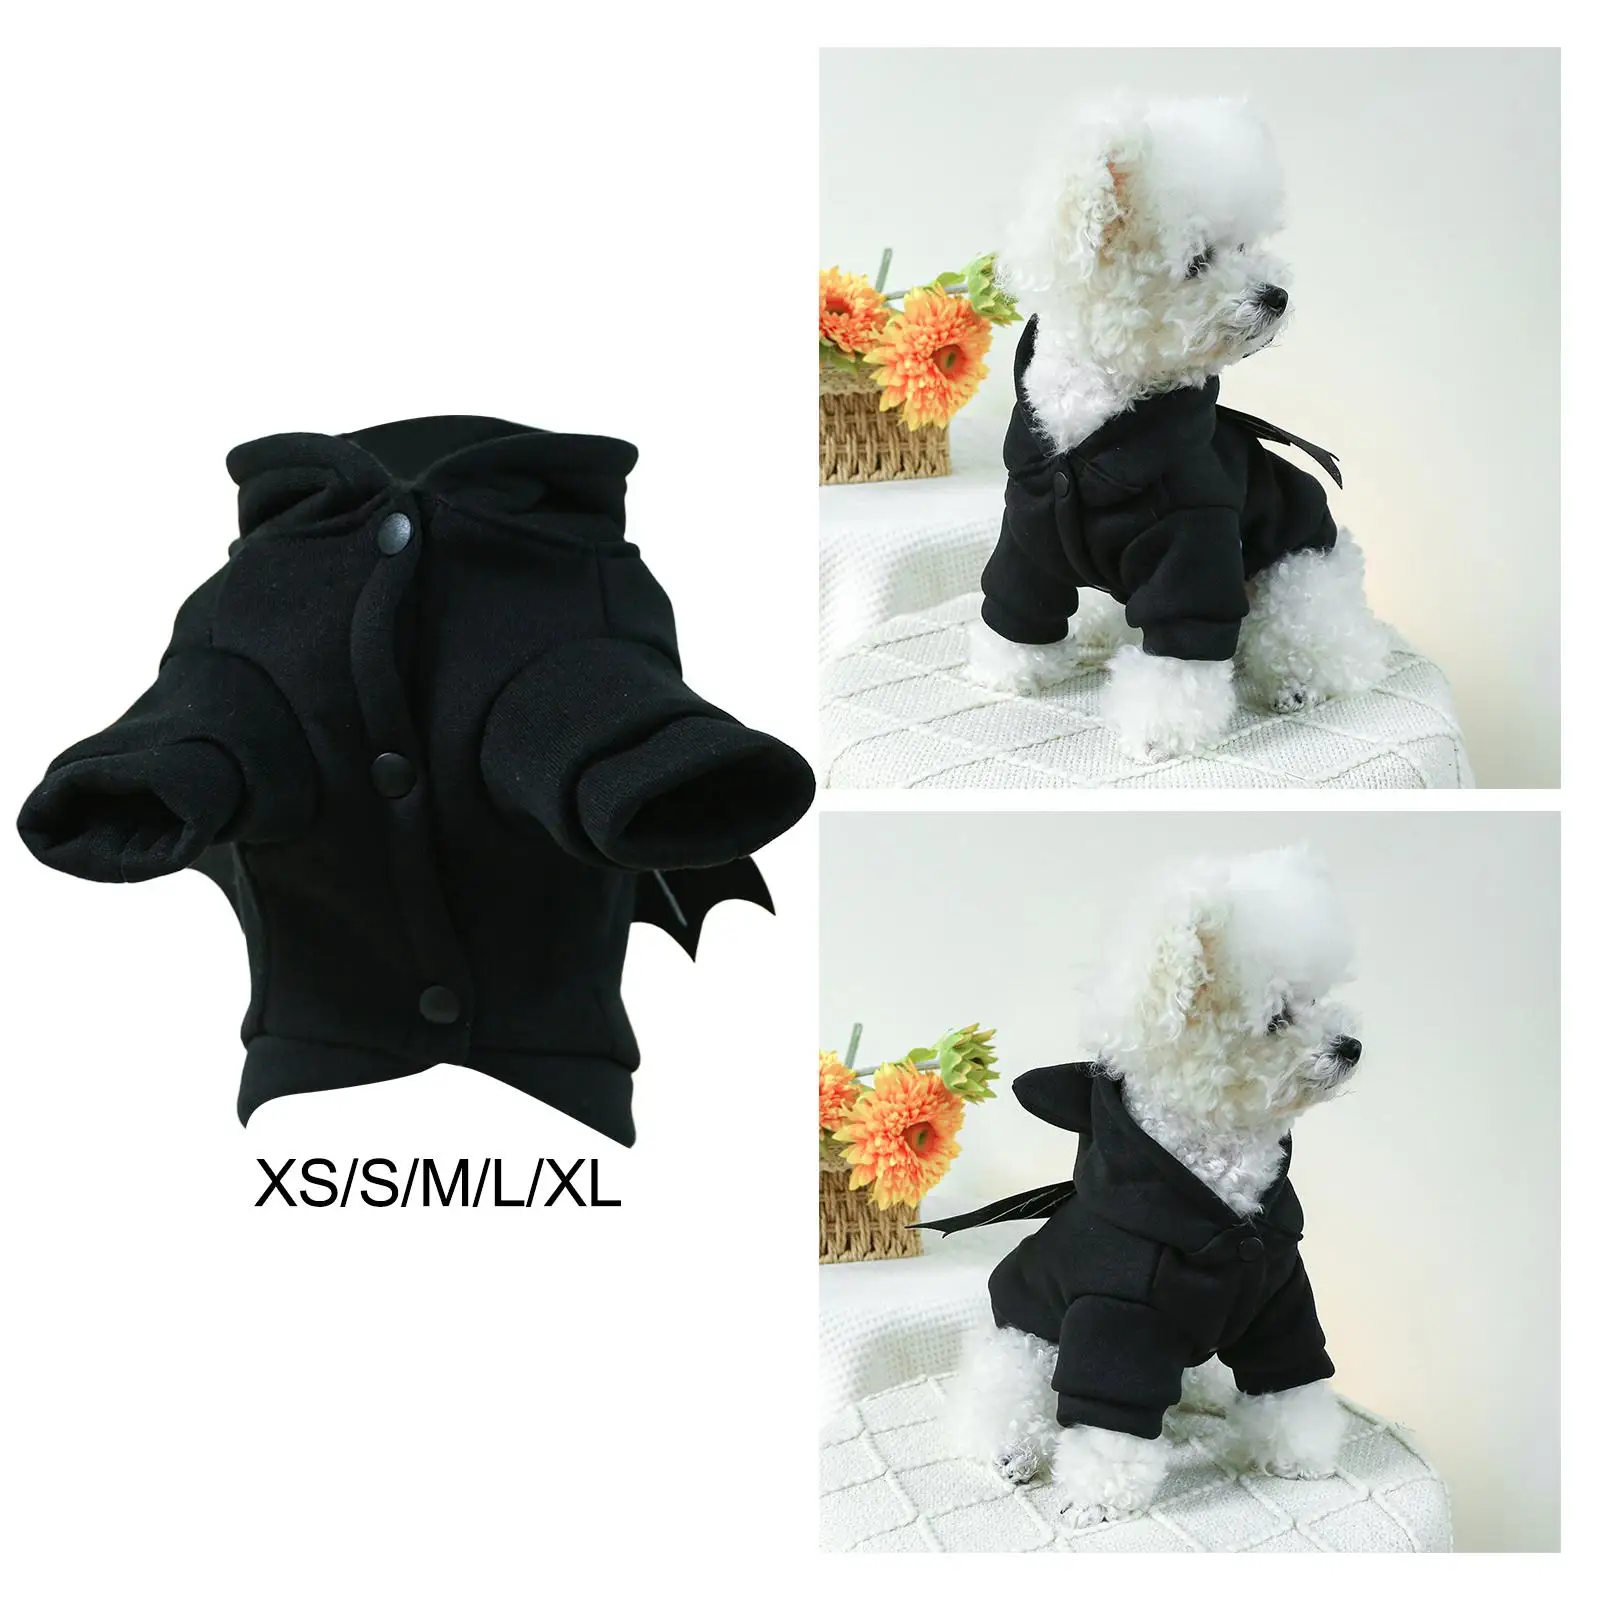 Pet Costume Cat Cosplay Halloween Dog Costume Decor Fancy Dress Pet Festival Supplies Cute Kitten Clothing for New Year Festival